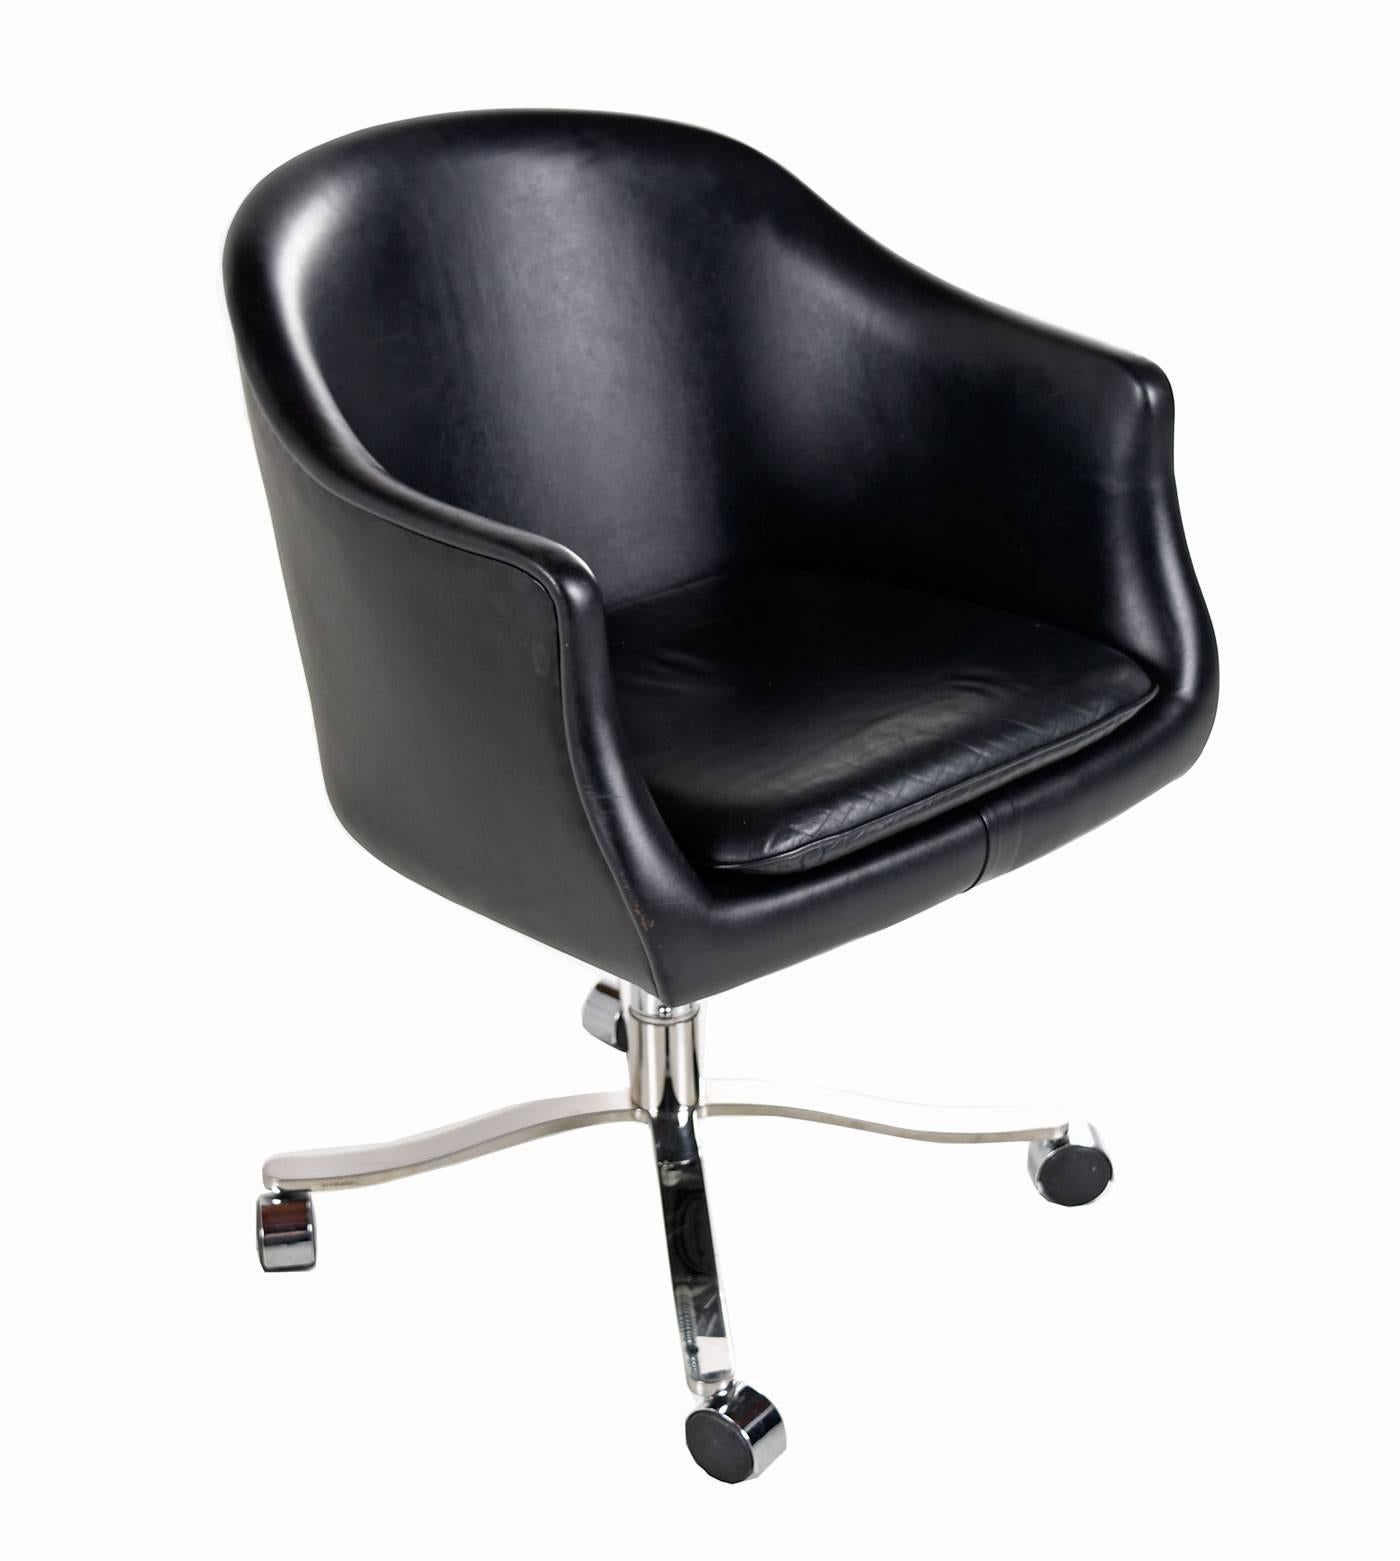 Nicos Zographos black leather bucket chair on casters. Four-star chrome-plated base. Tilt, swivel, adjustable, tilt lock. Maker name is etched in chrome base.

 